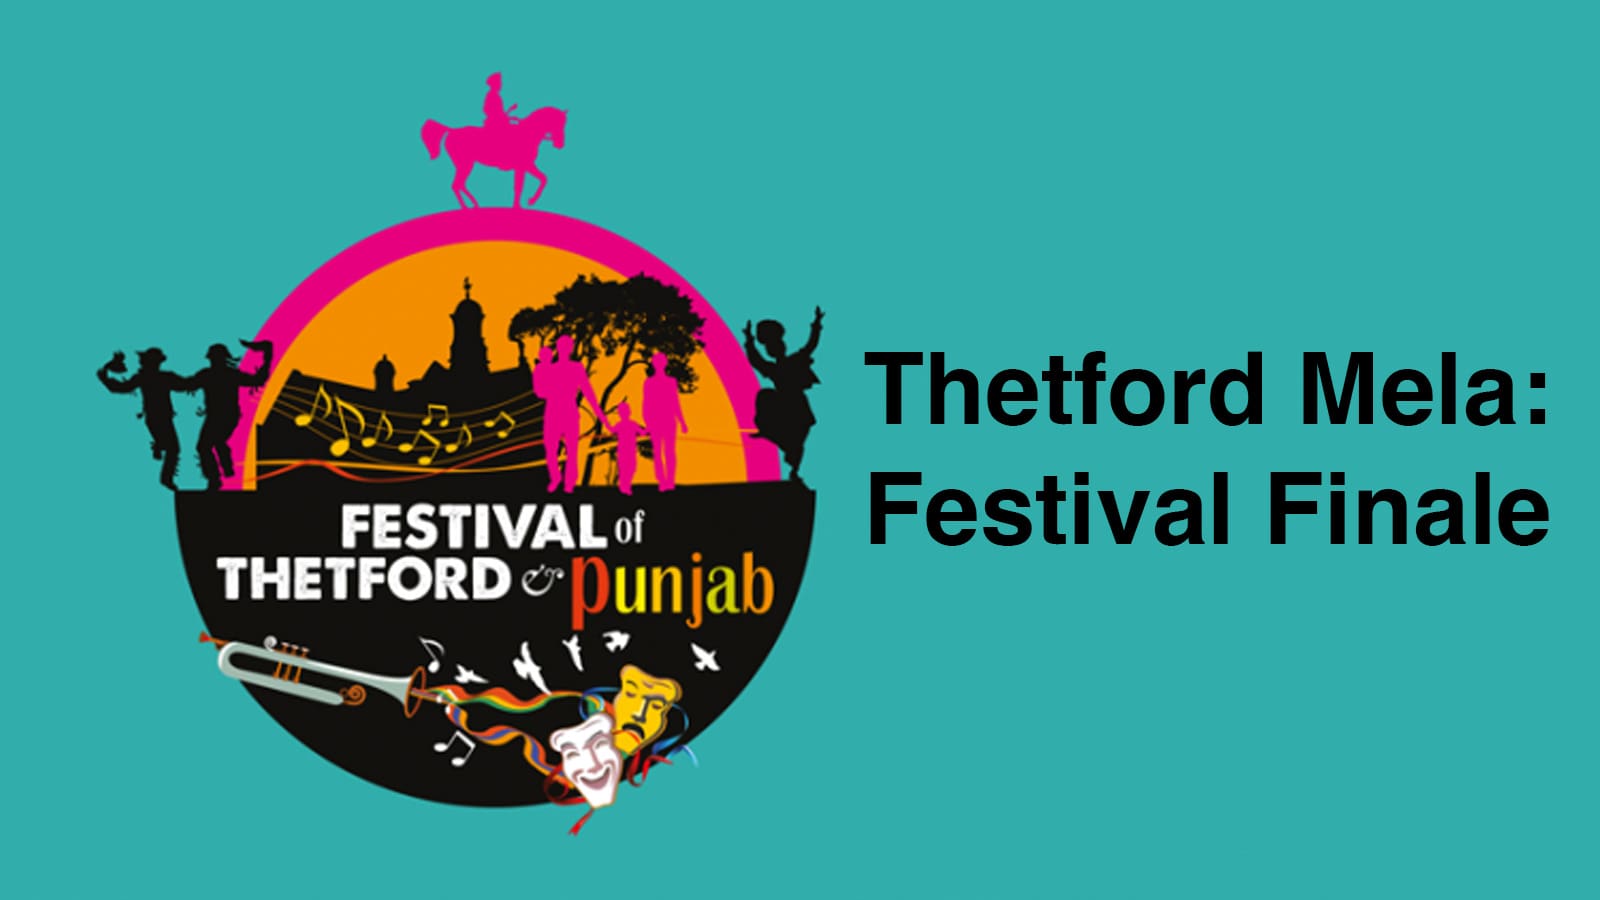 Thetford Bubbly Hub what's on and events Festival of Thetford and Punjab Mela Festival Finale